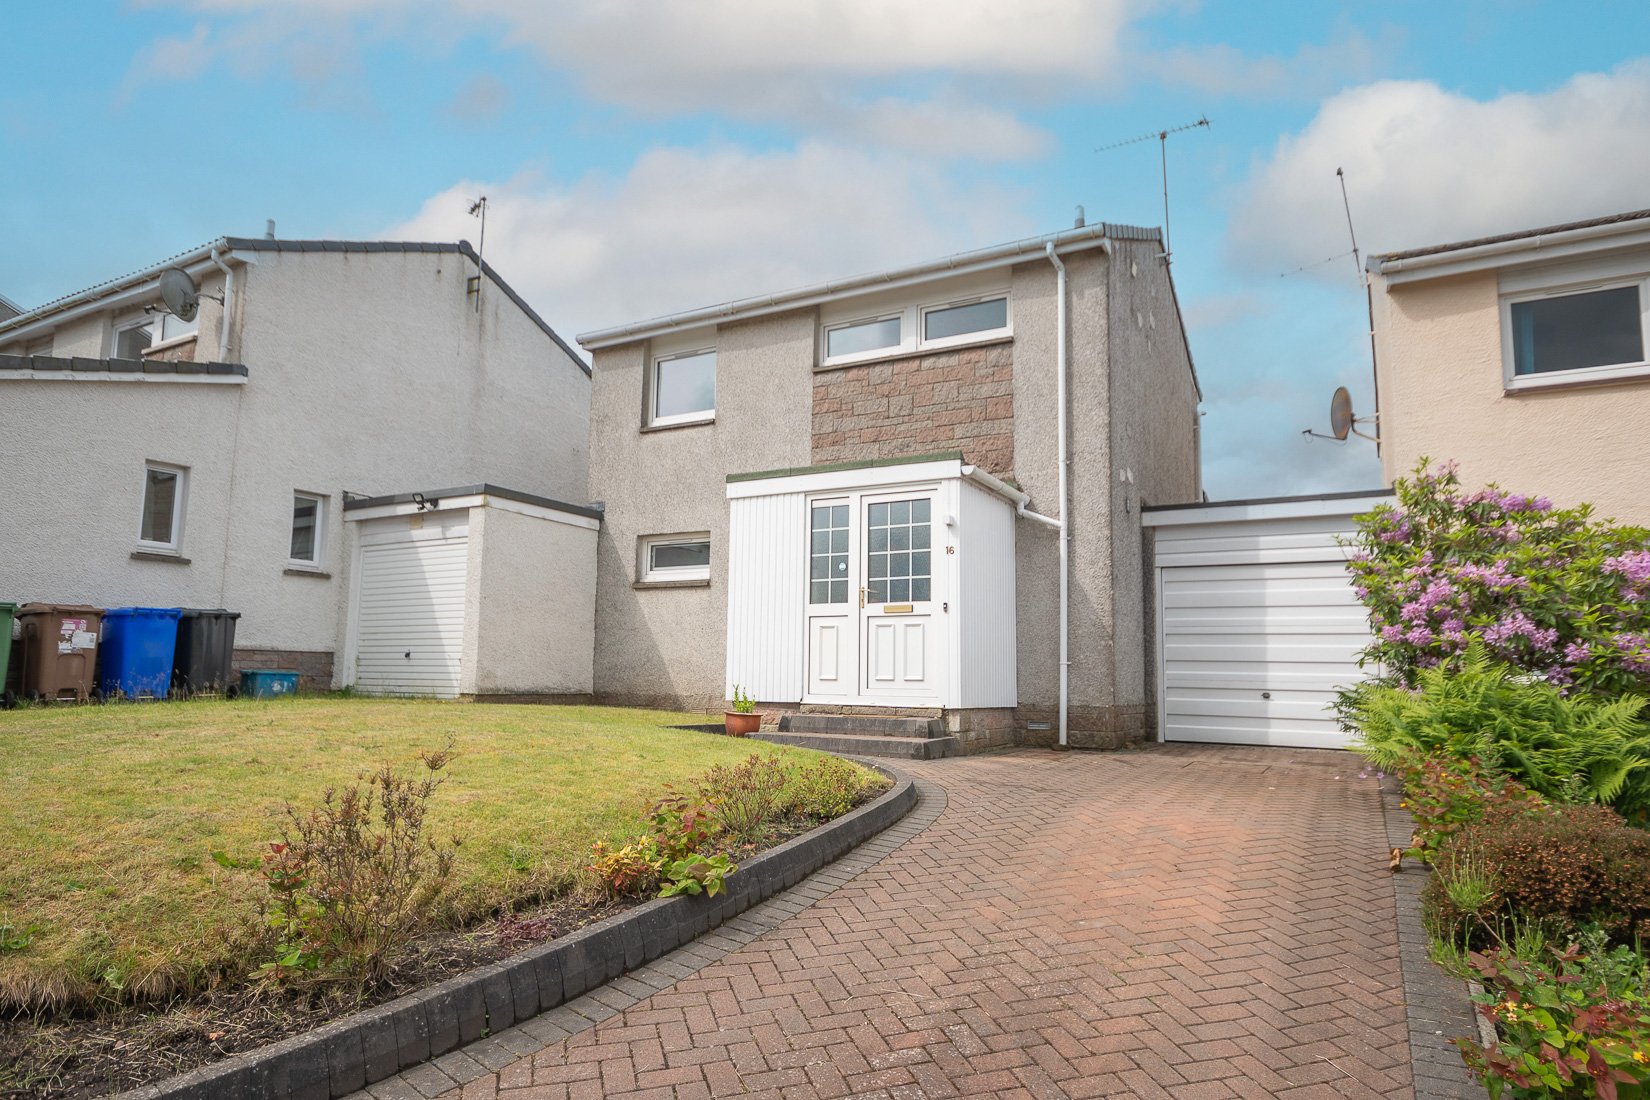 3 bed link detached house for sale in Braemar Avenue, Dunblane - Property Image 1